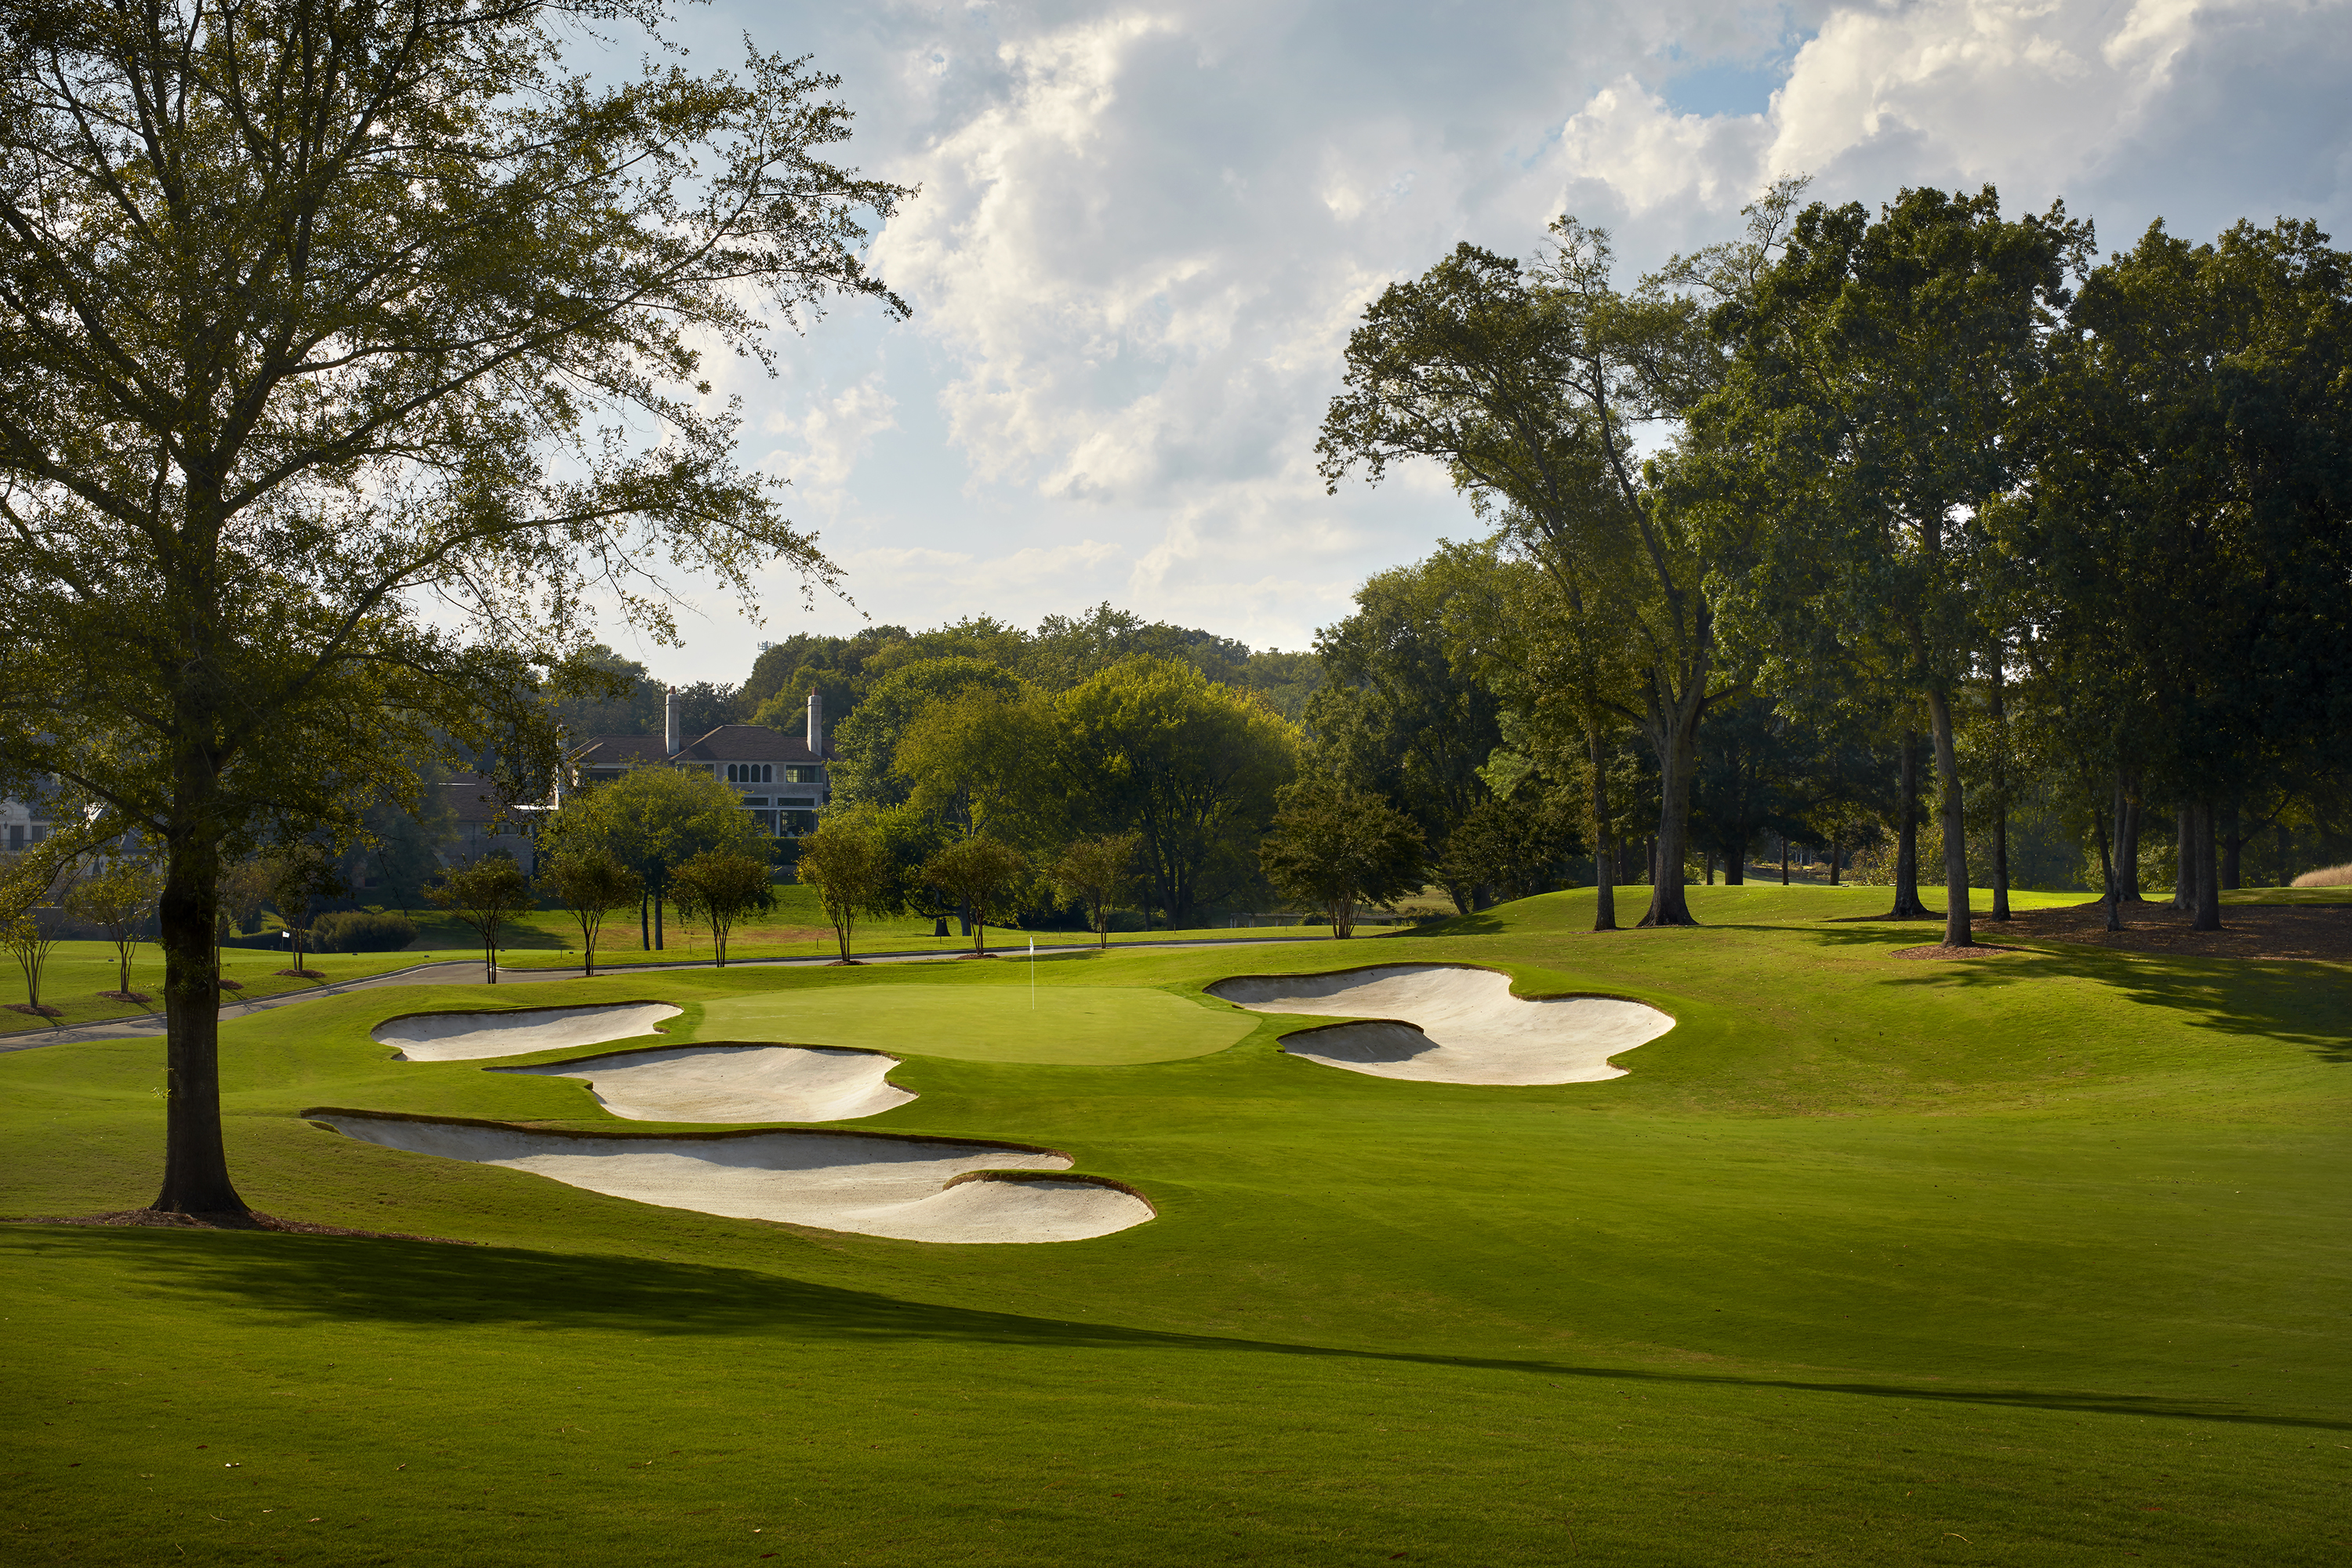 How new grass and 4 holes changed Quail Hollow